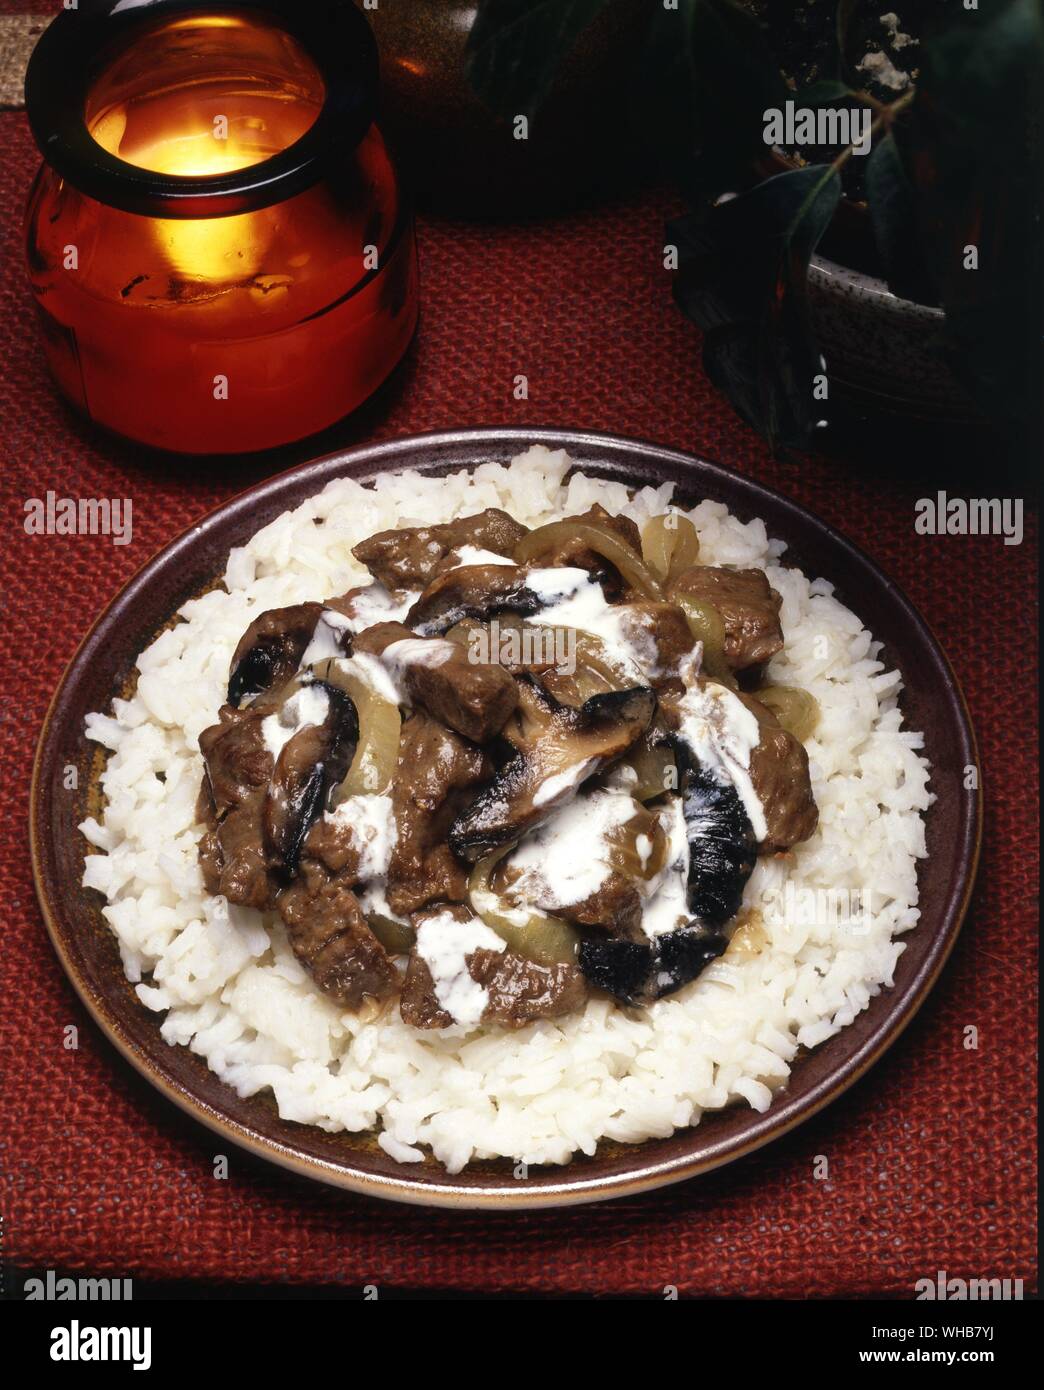 Strips of meat, onions, mushrooms and cream on a bed of rice.. Stock Photo